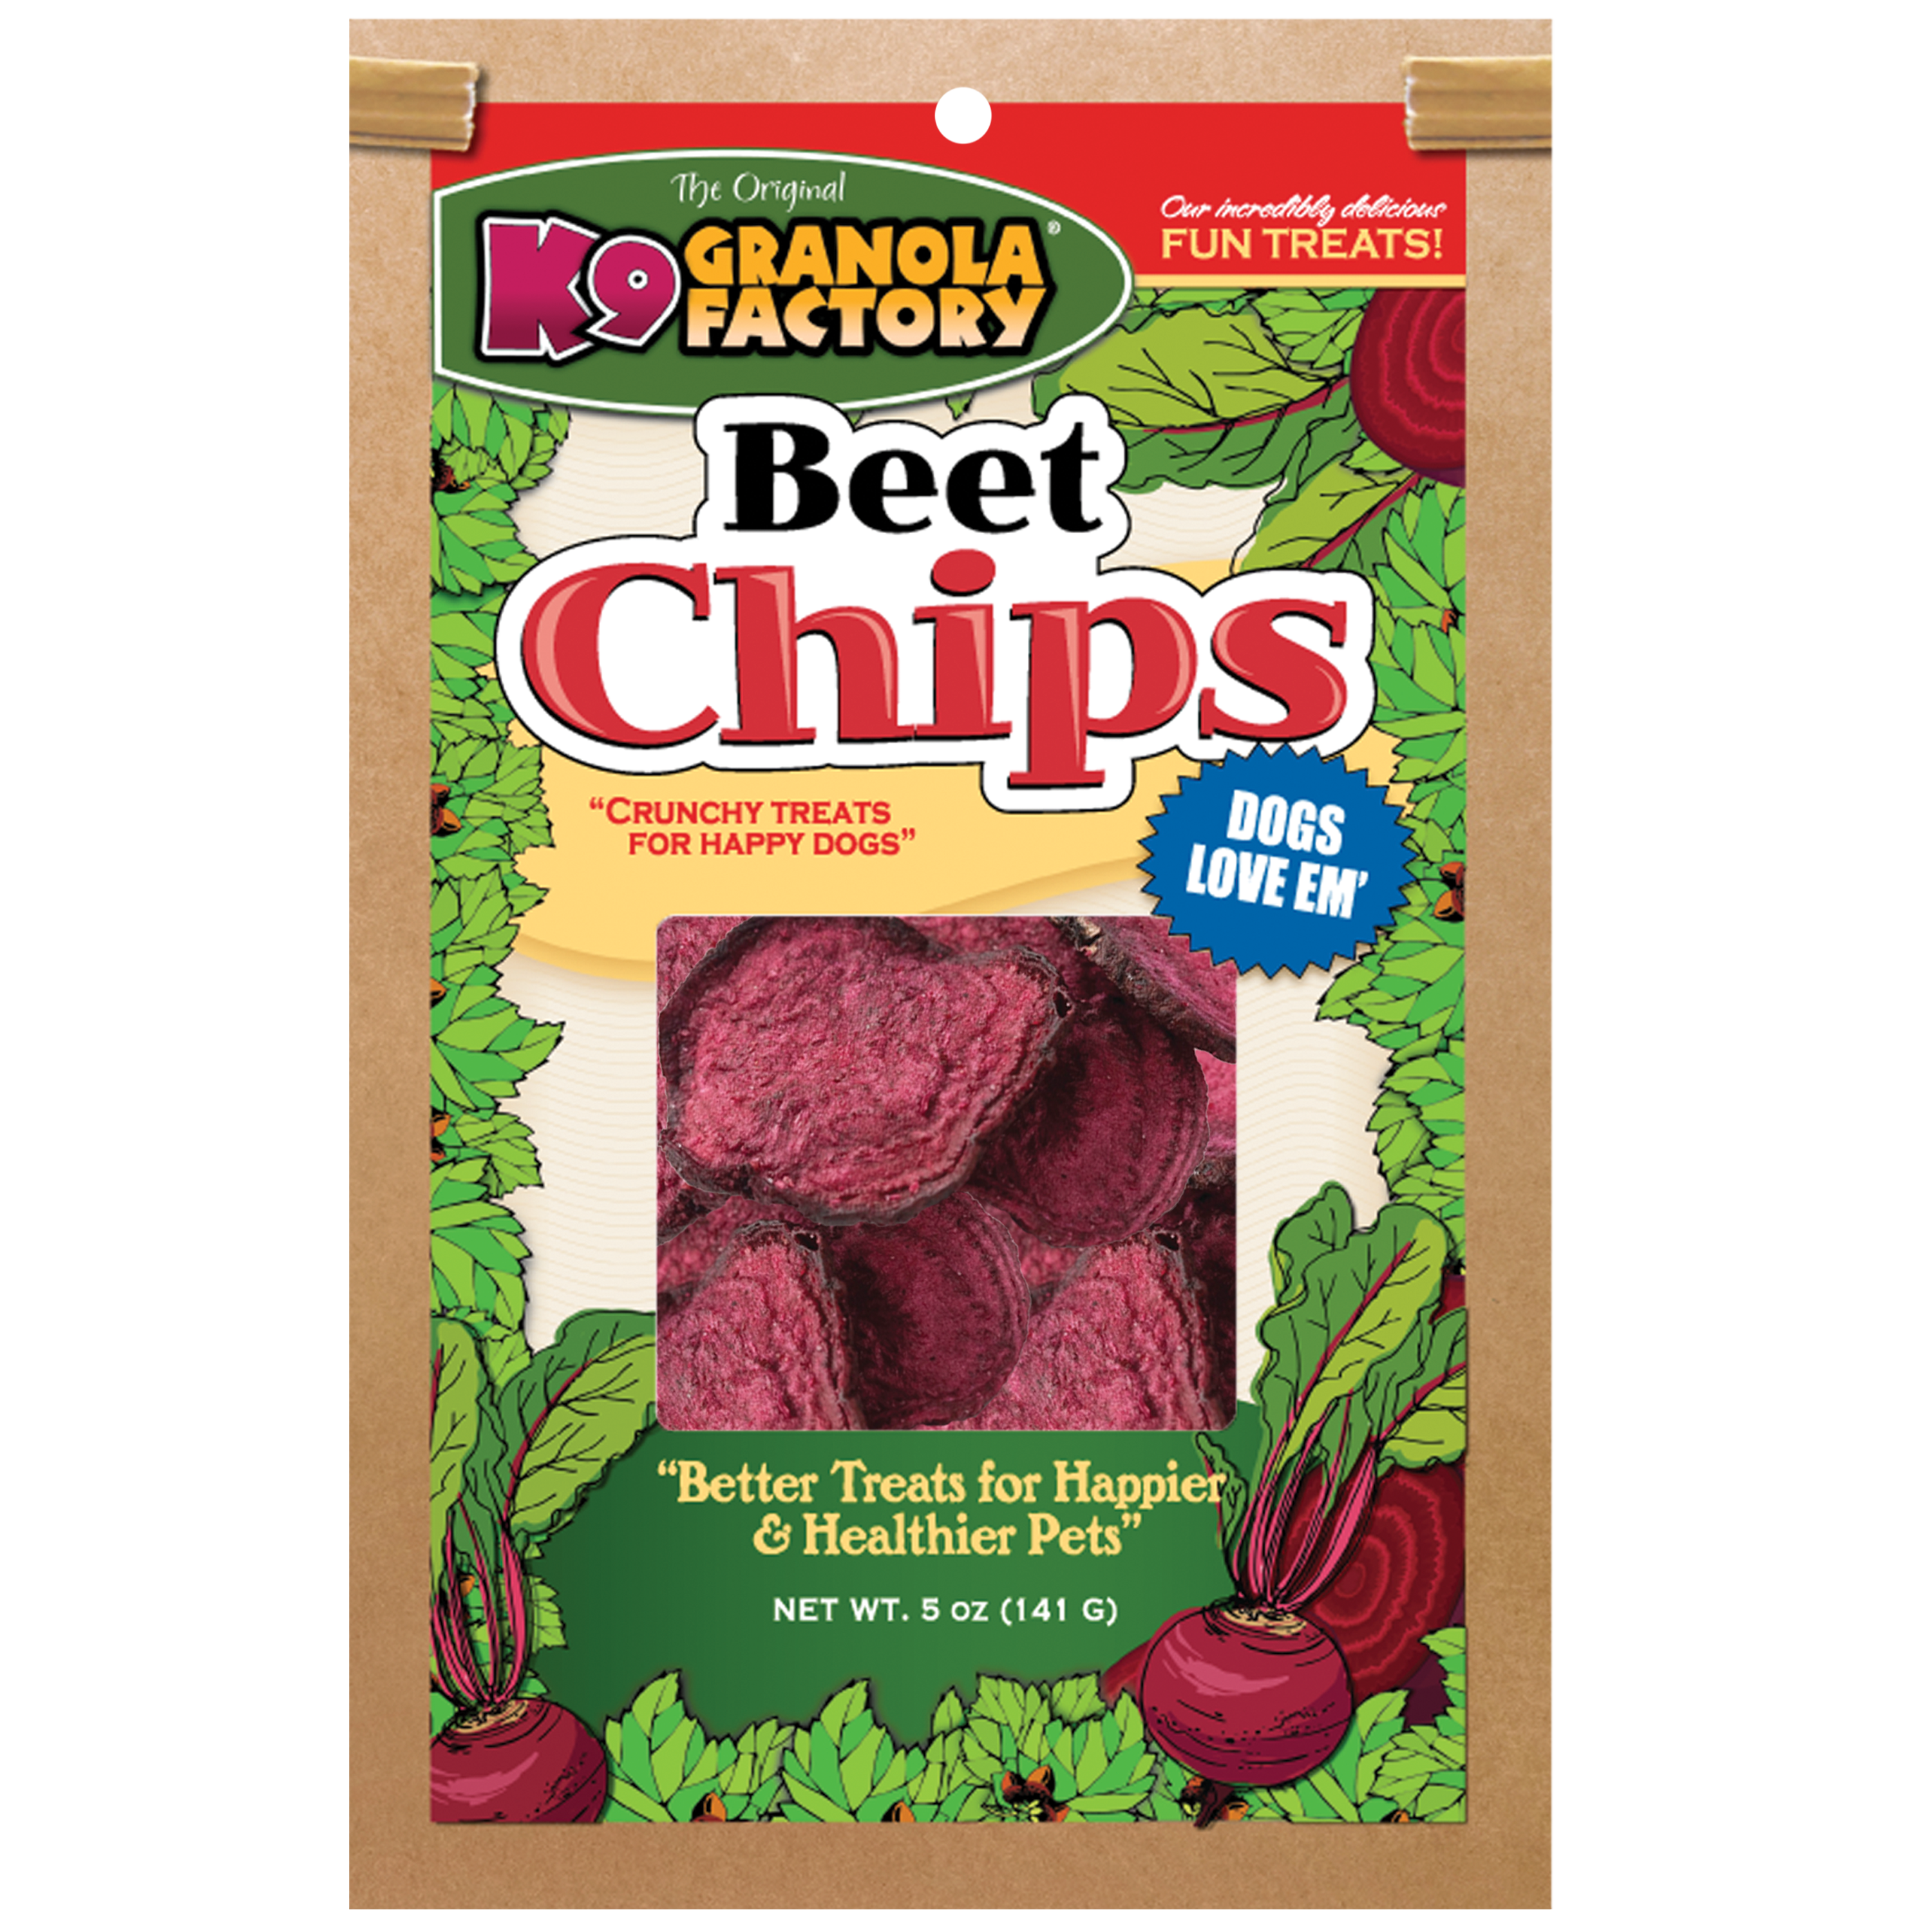 K9 Granola Factory Chip Collection Beet Chips Dog Treats, 6oz